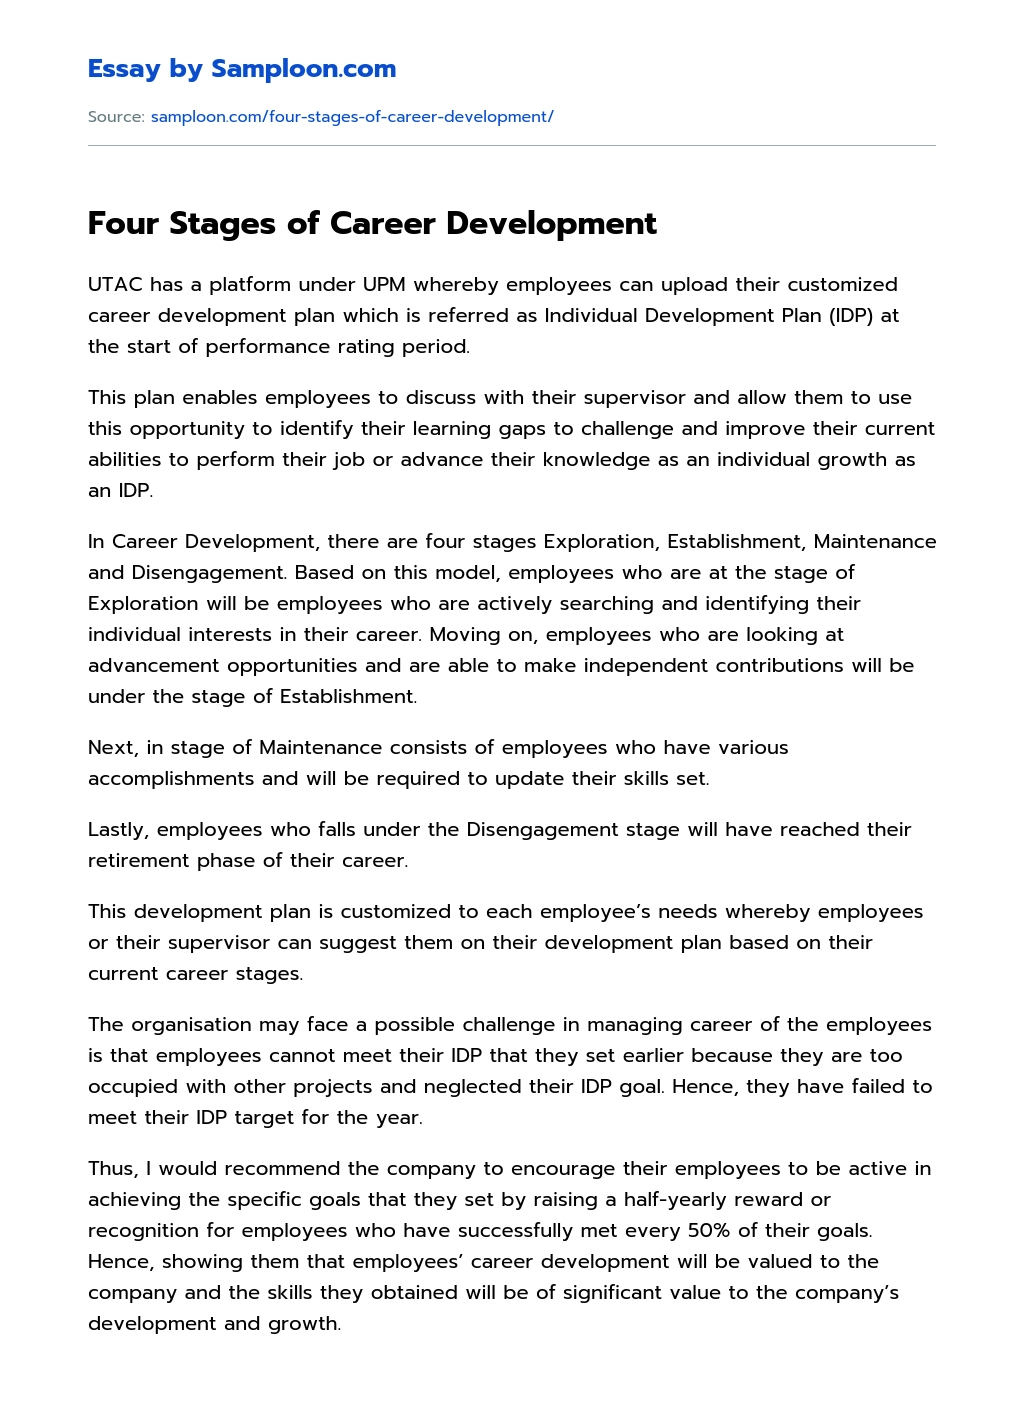 Four Stages of Career Development essay